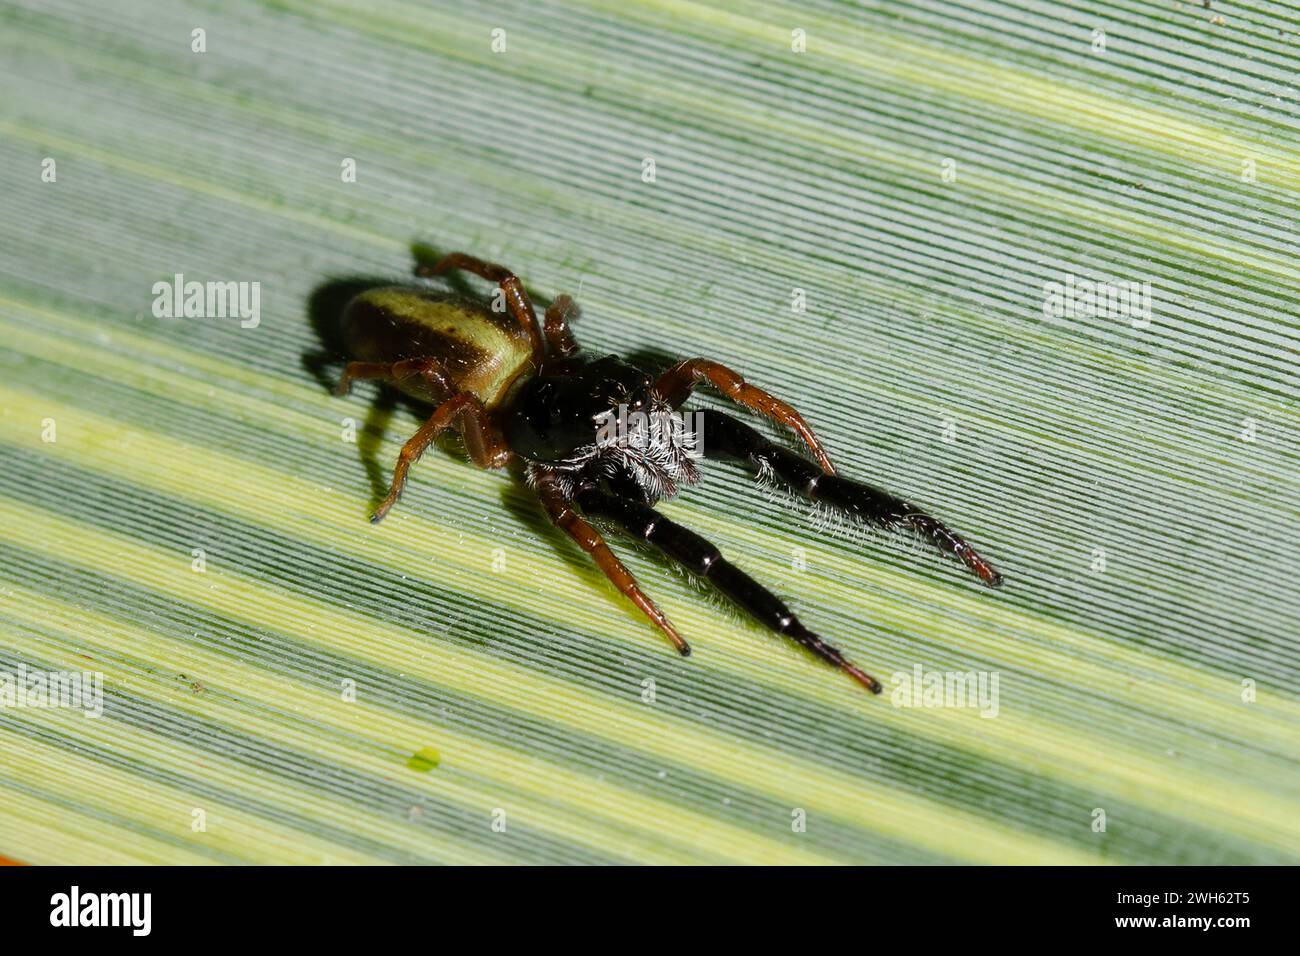 Black-headed Jumping Spider, Trite planiceps, endemic to New Zealand, on Flax leaf, Phormium sp, also endemic, Nelson, South Island, New Zealand Stock Photo